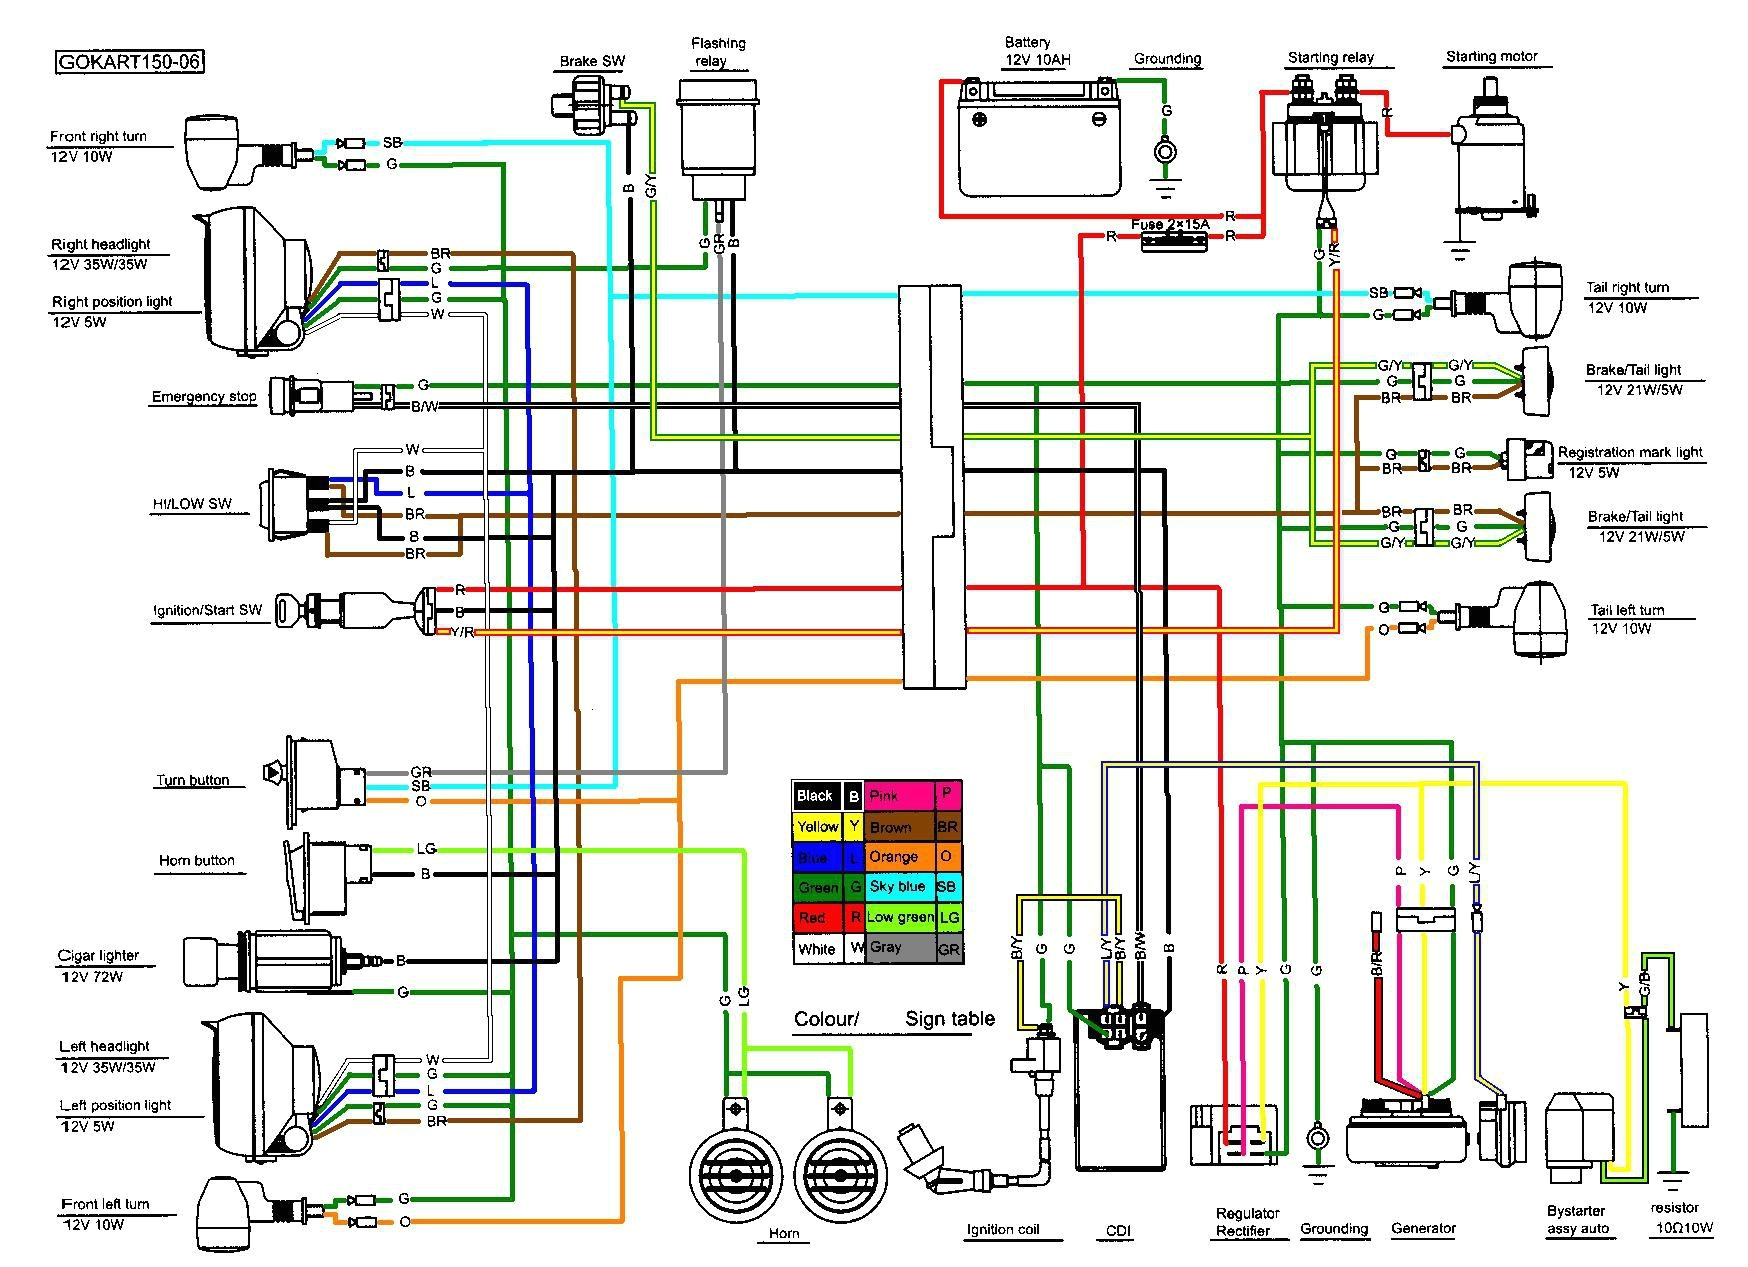 mobility scooter wiring diagram wiring diagram blog ew 36 mobility scooter wiring diagram ew 36 wiring diagram